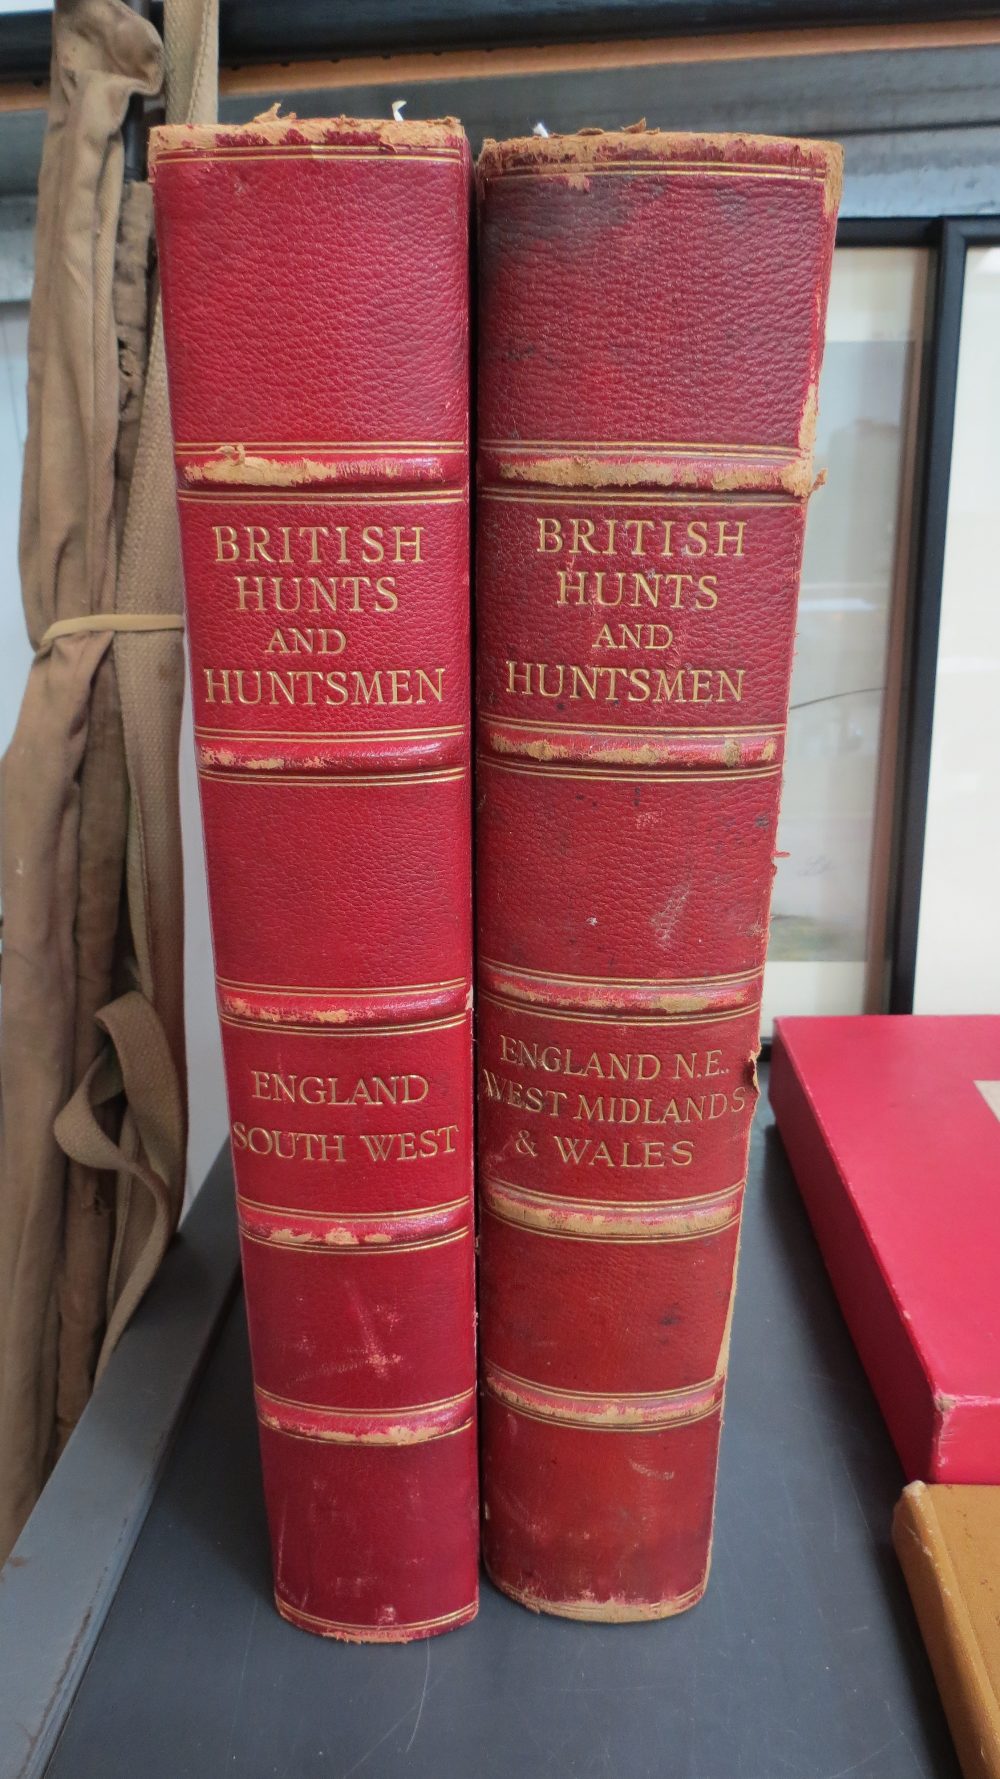 Book: Two volumes of  British Hunts and Huntsmen - England N.E. West Midland and Wales and England